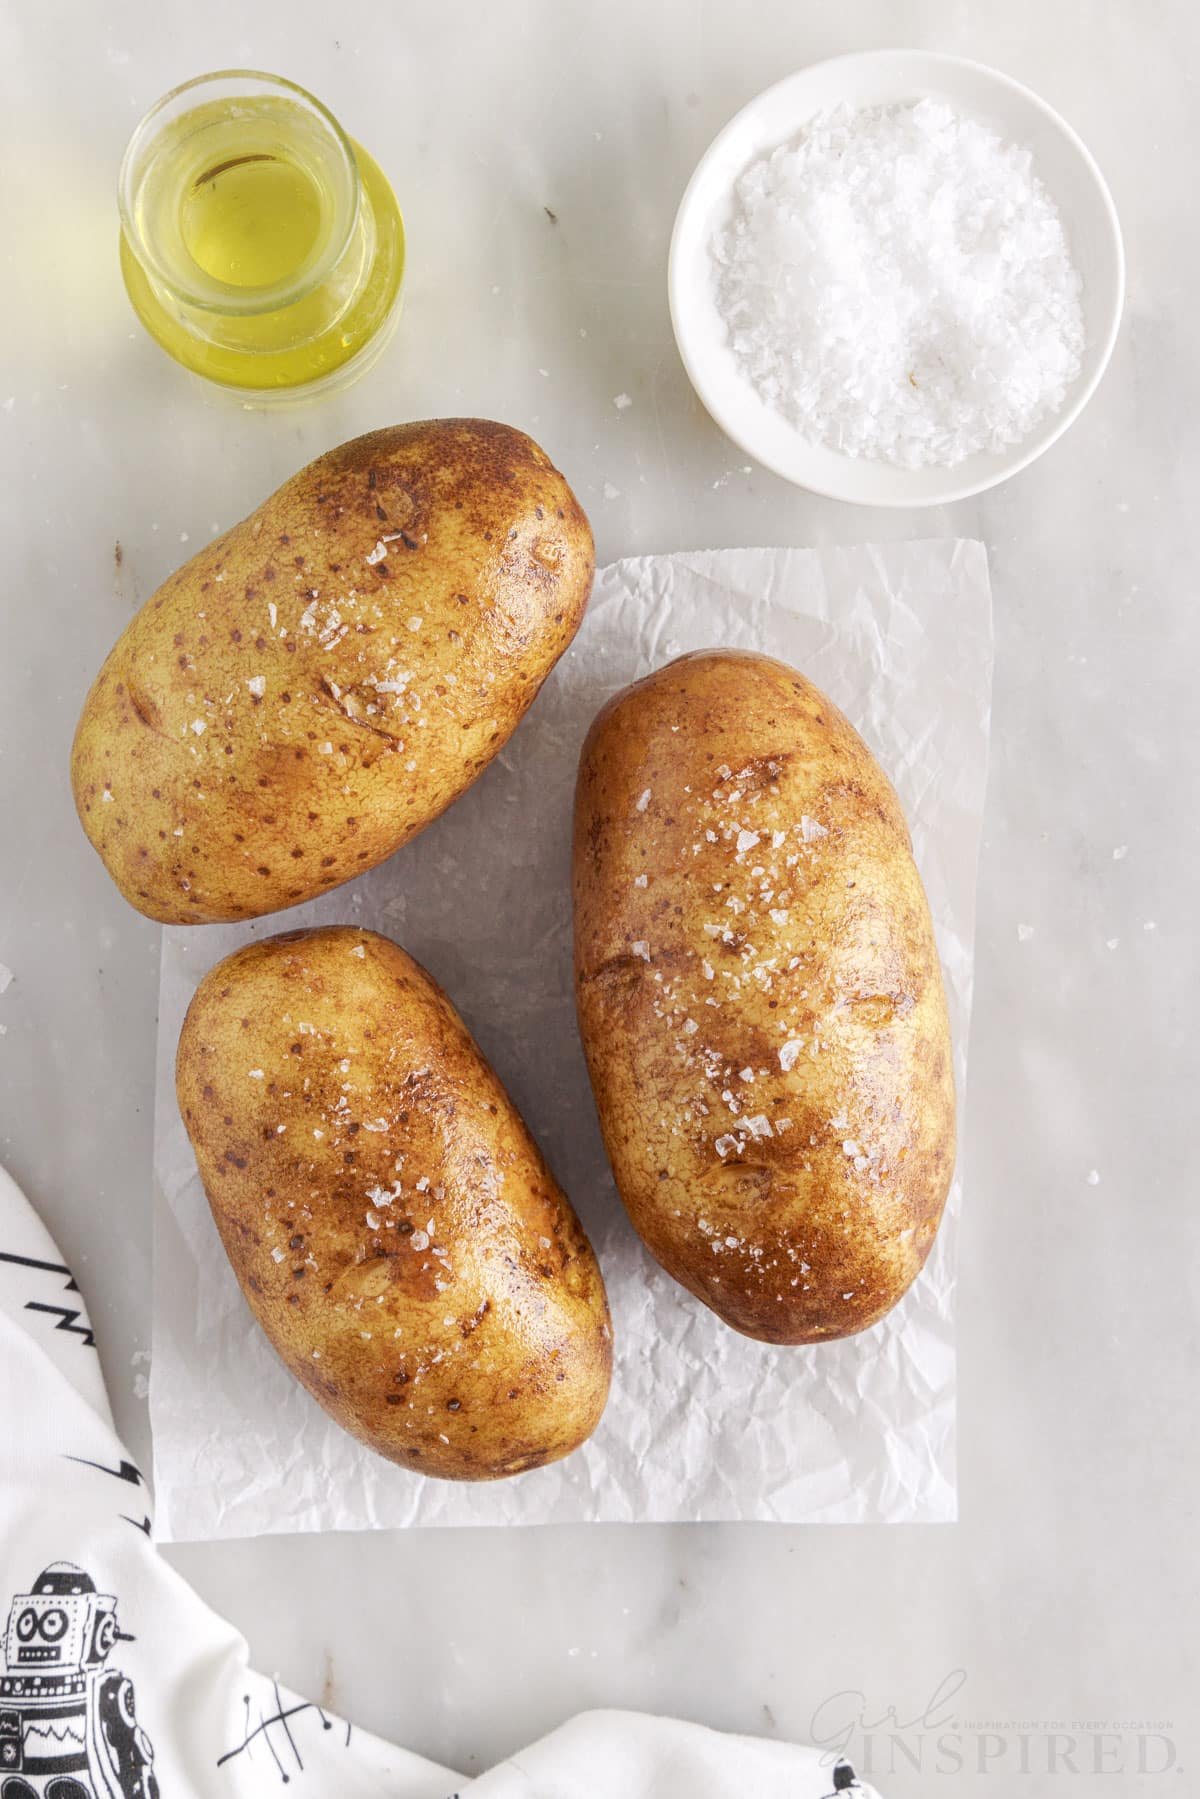 potatoes that have been sprinkled with salt